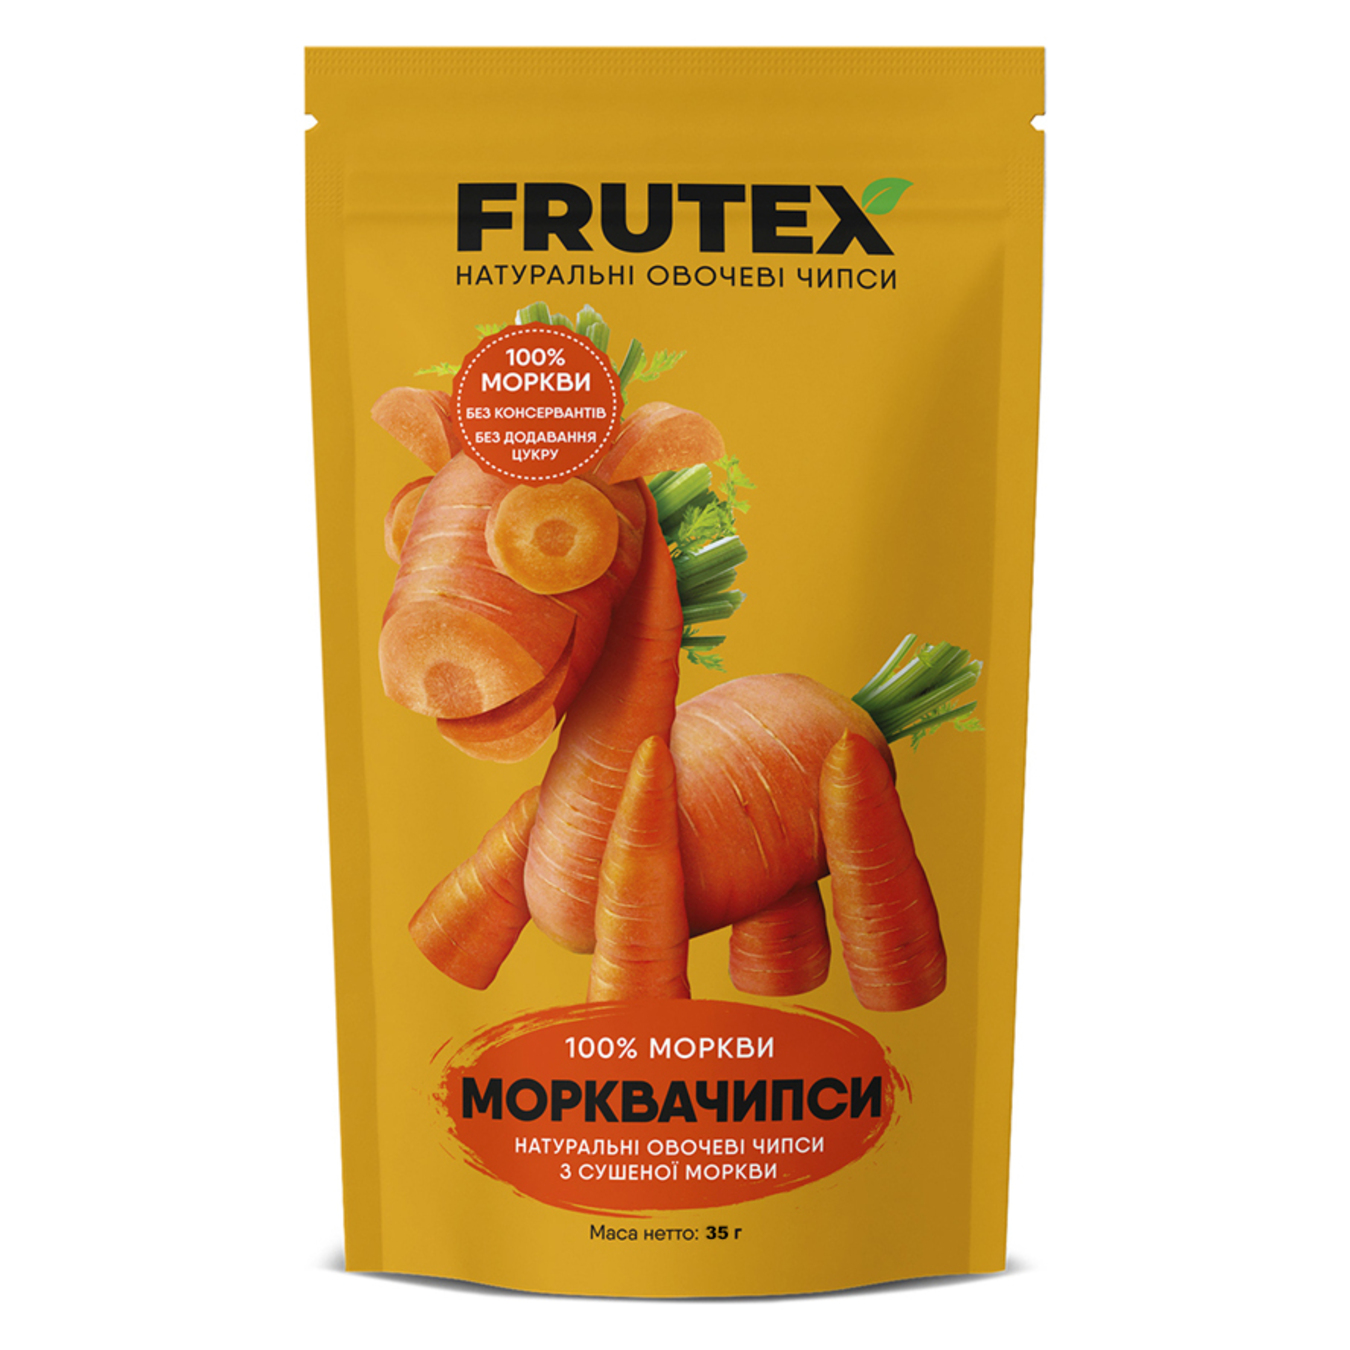 Vegetable chips Frutex carrot chips 30g